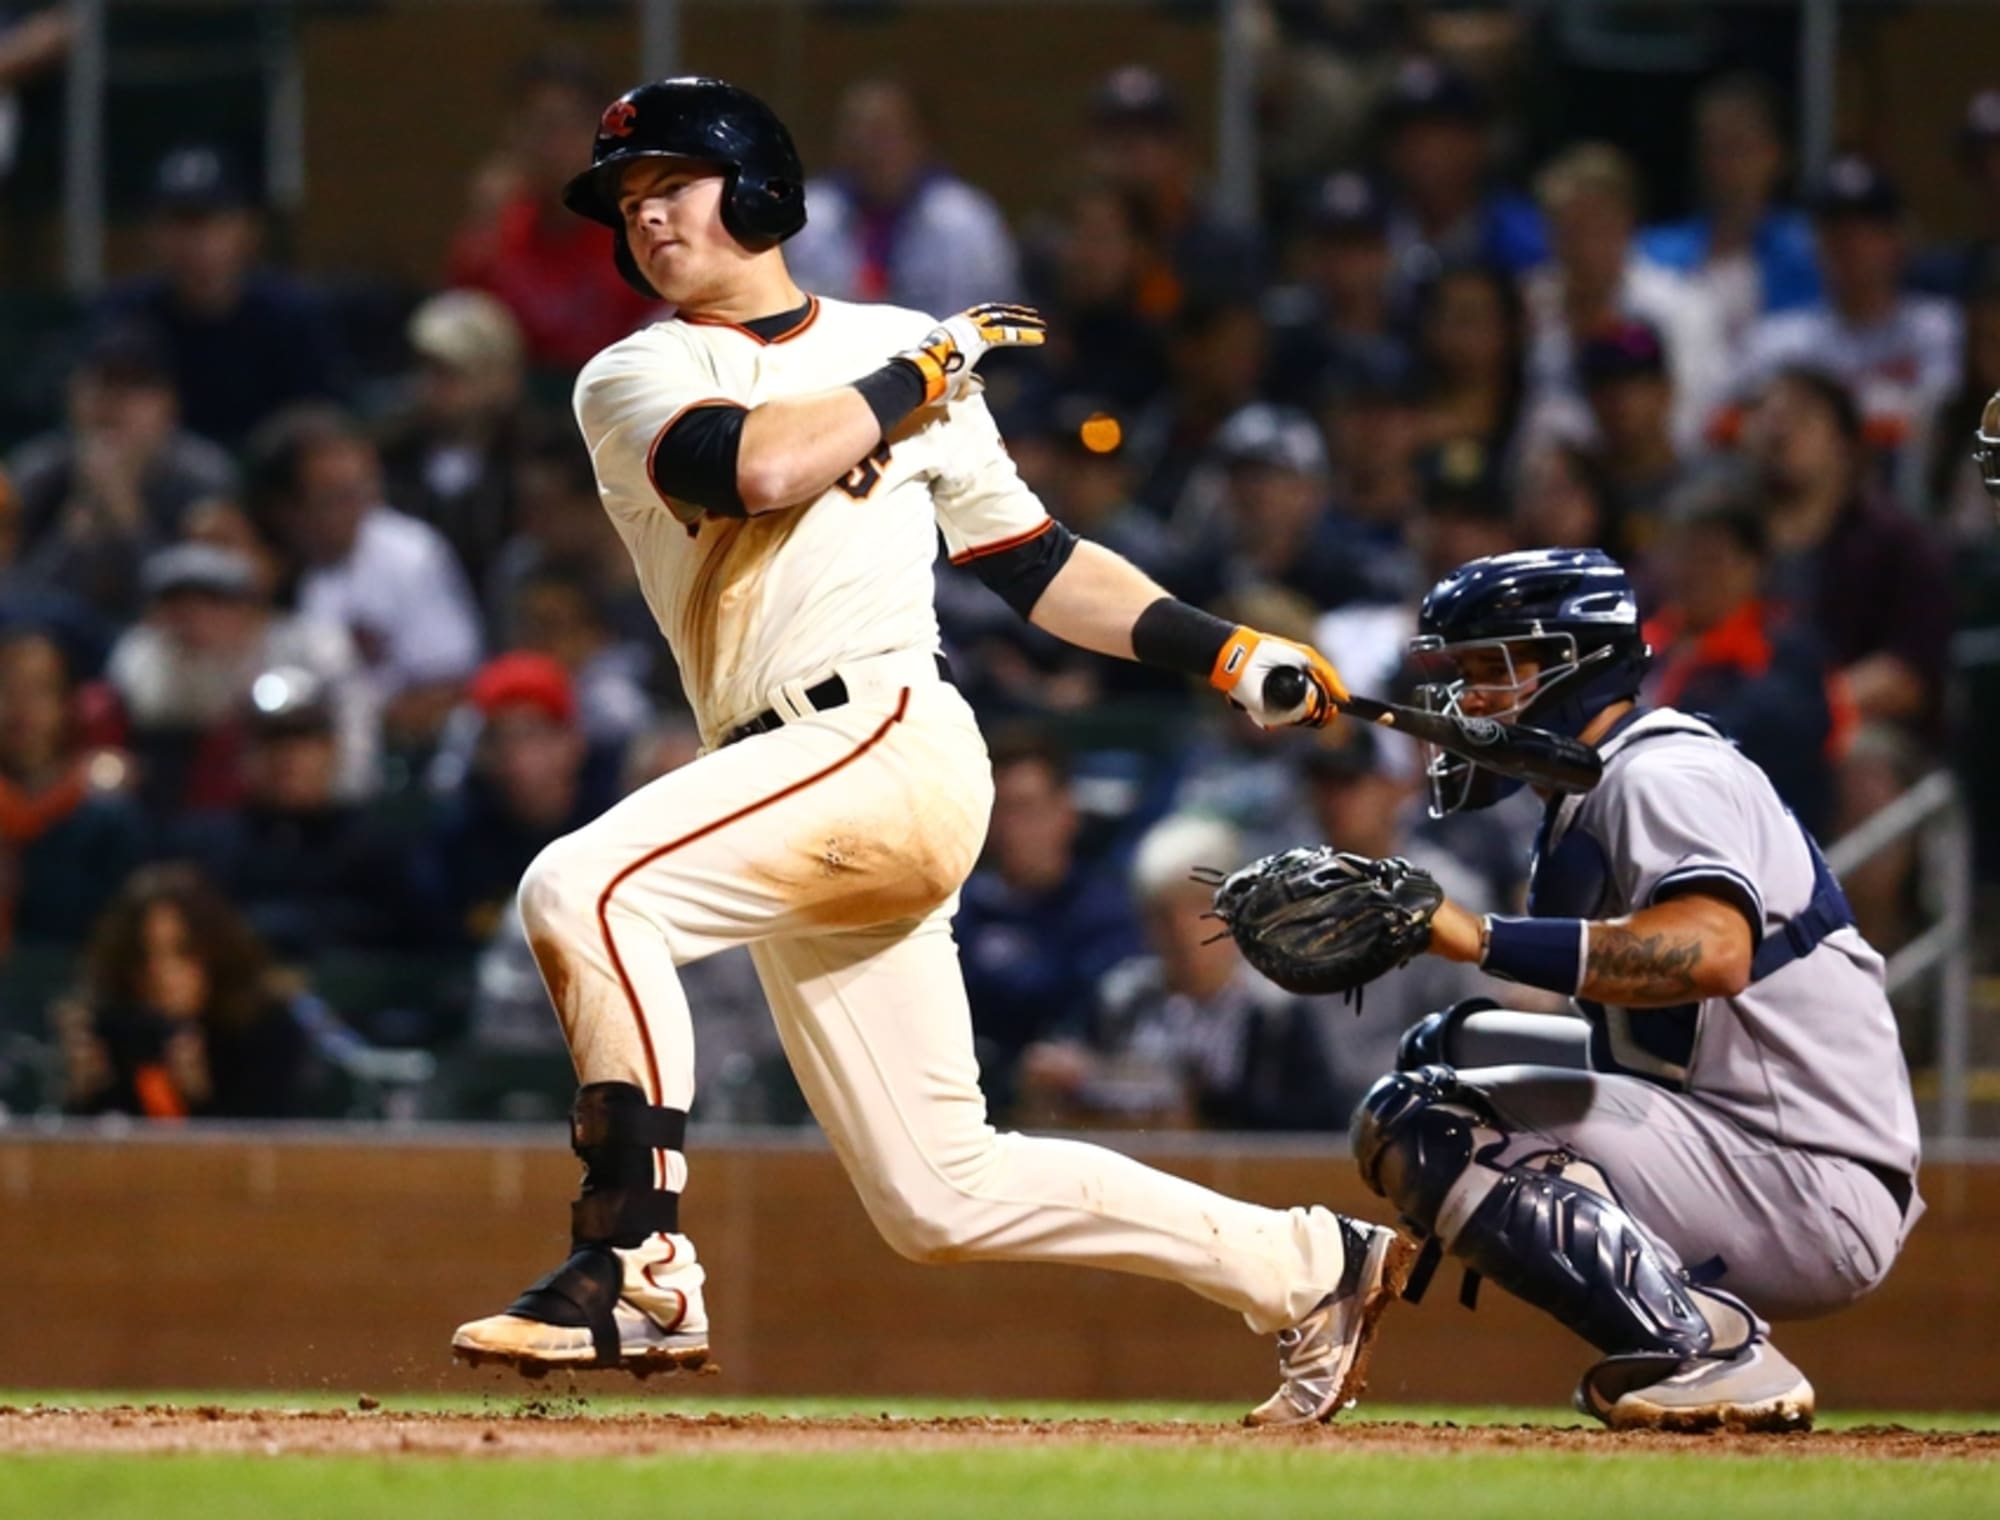 Red Sox infielder Christian Arroyo has the potential for a